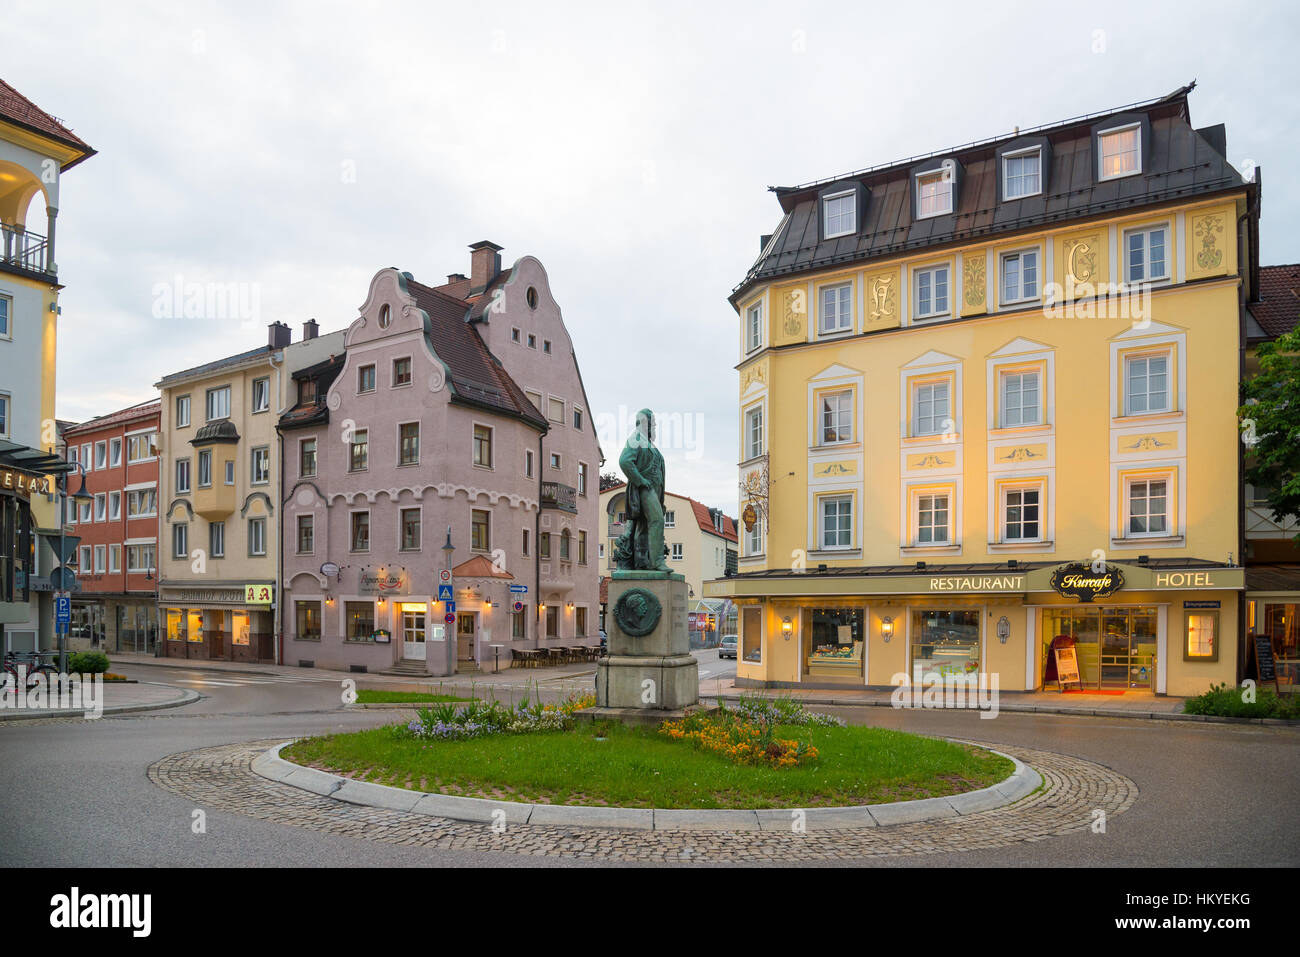 Fussen, Germany - June 4, 2016: View of beautiful historical street in Fussen with typical bavarian architecture buildings. Stock Photo